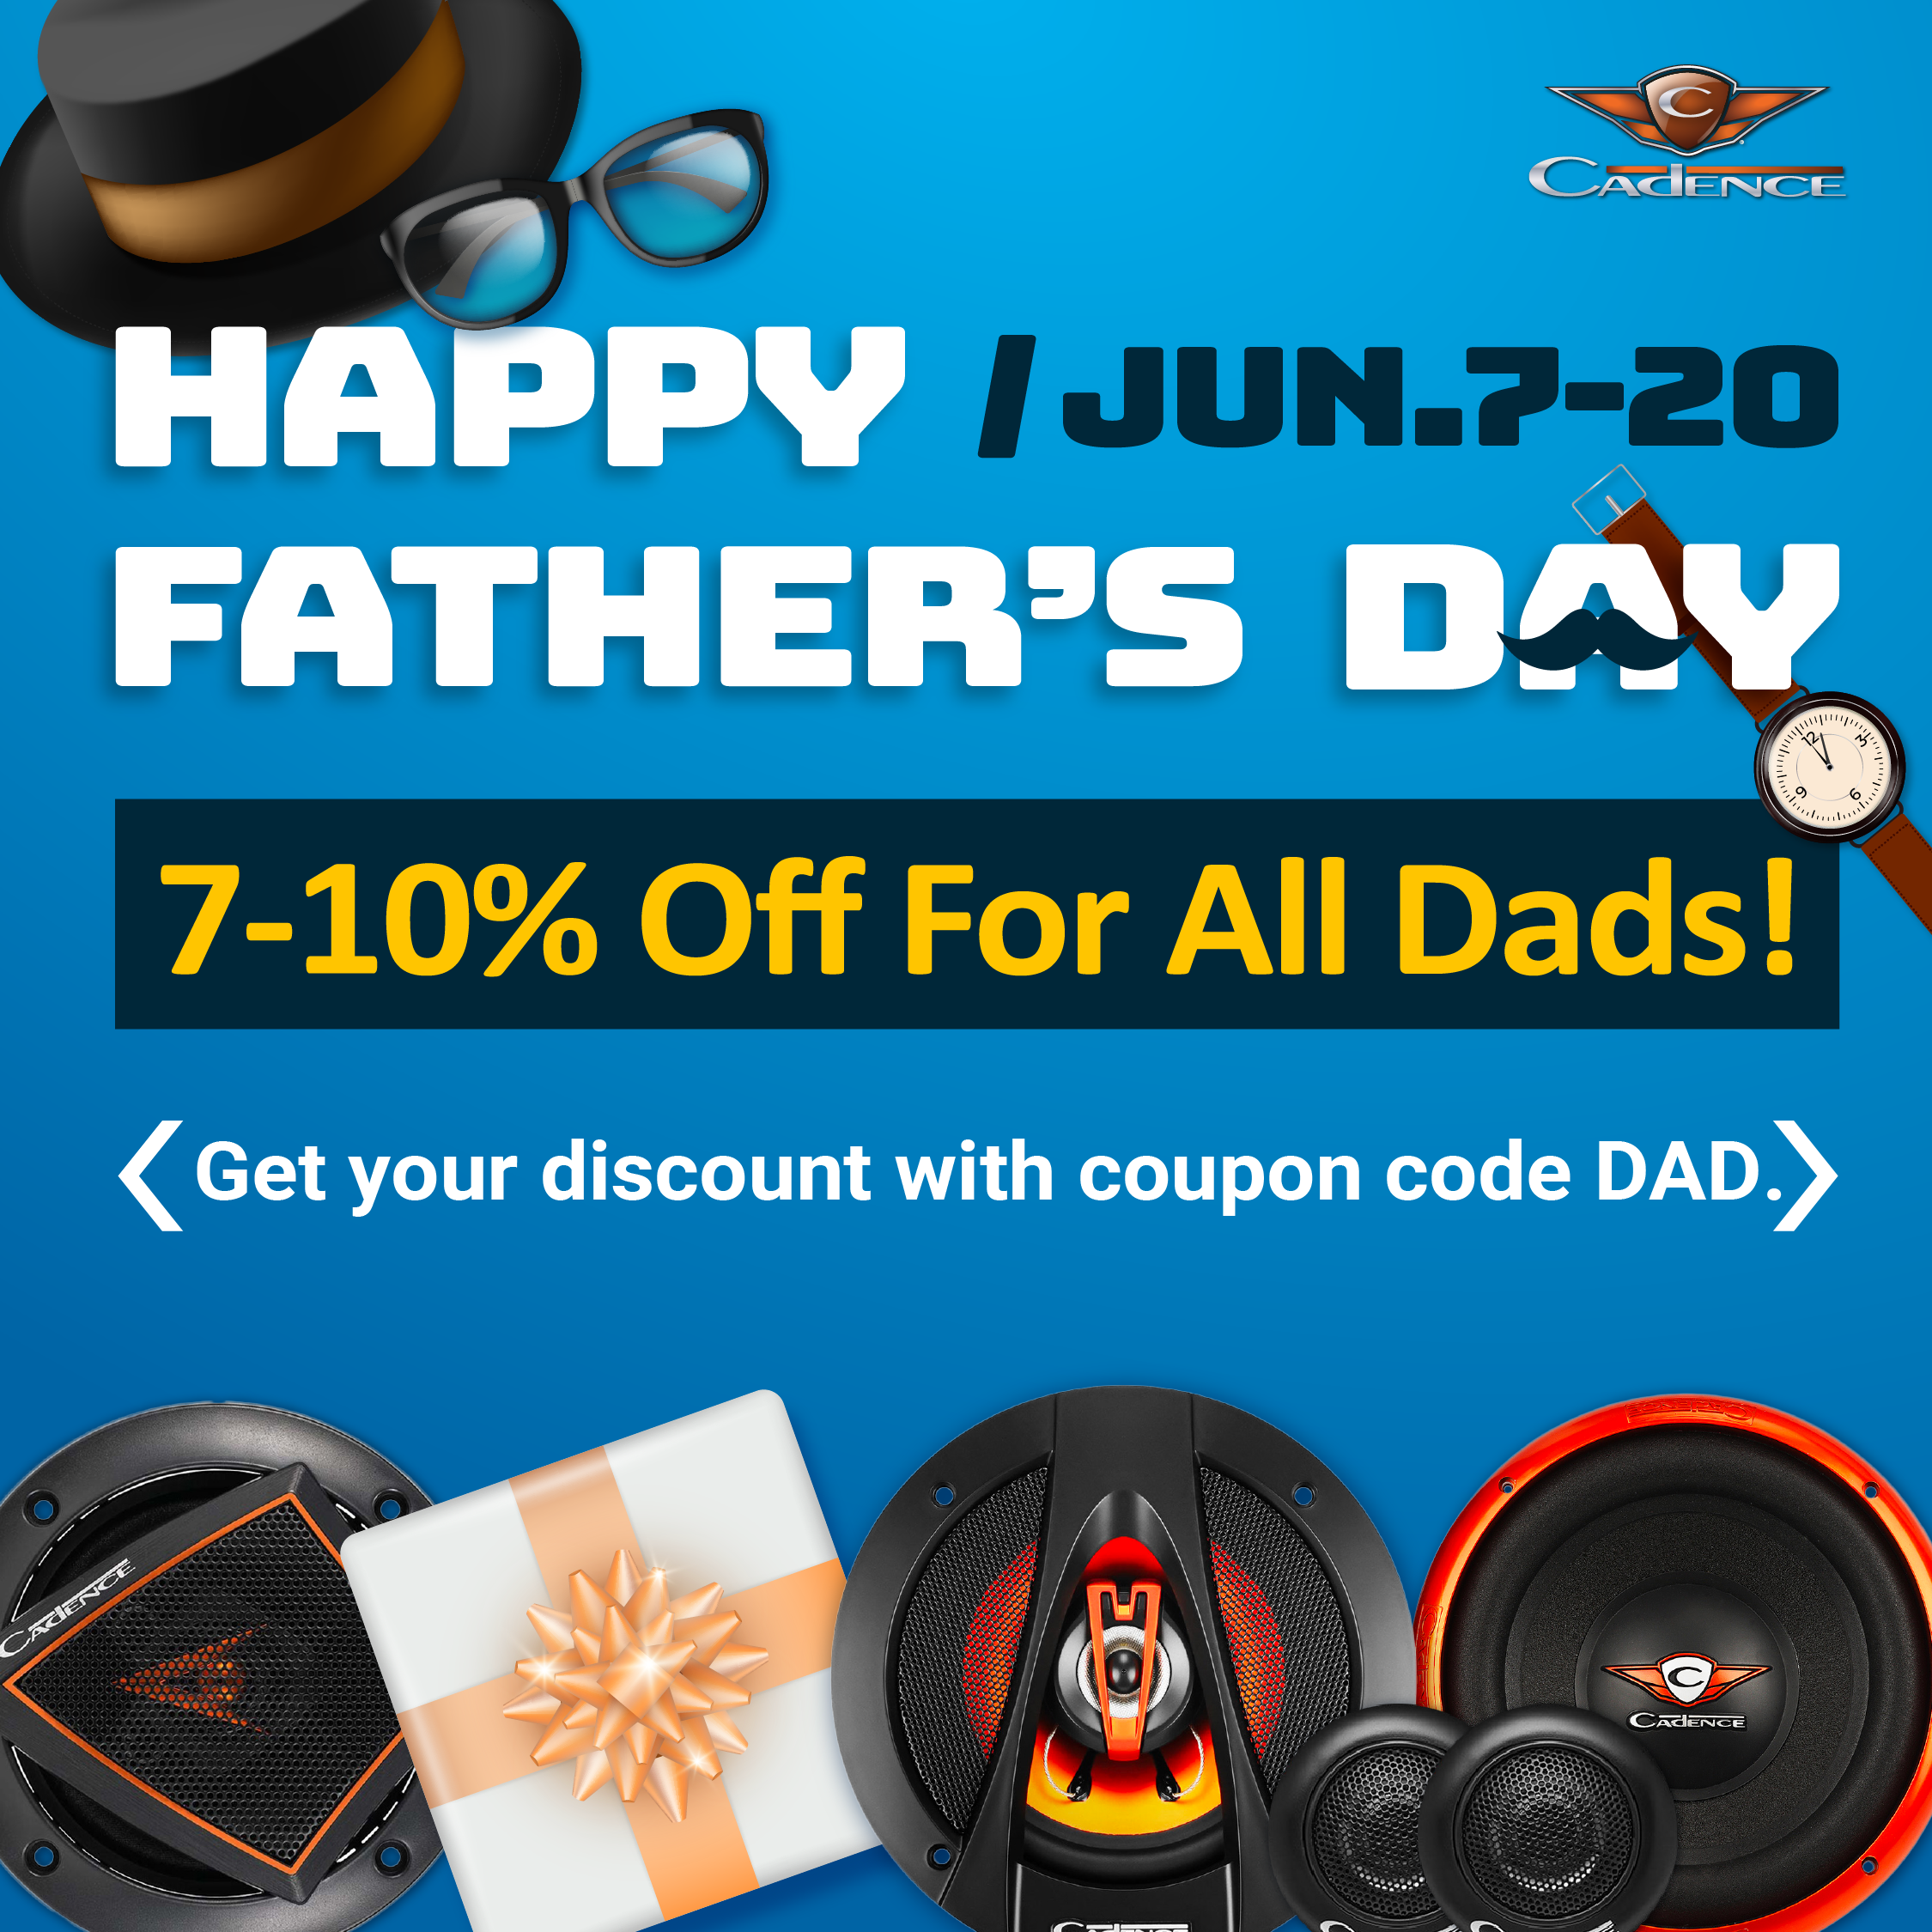 Celebrate Father's Day with Cadence Sound